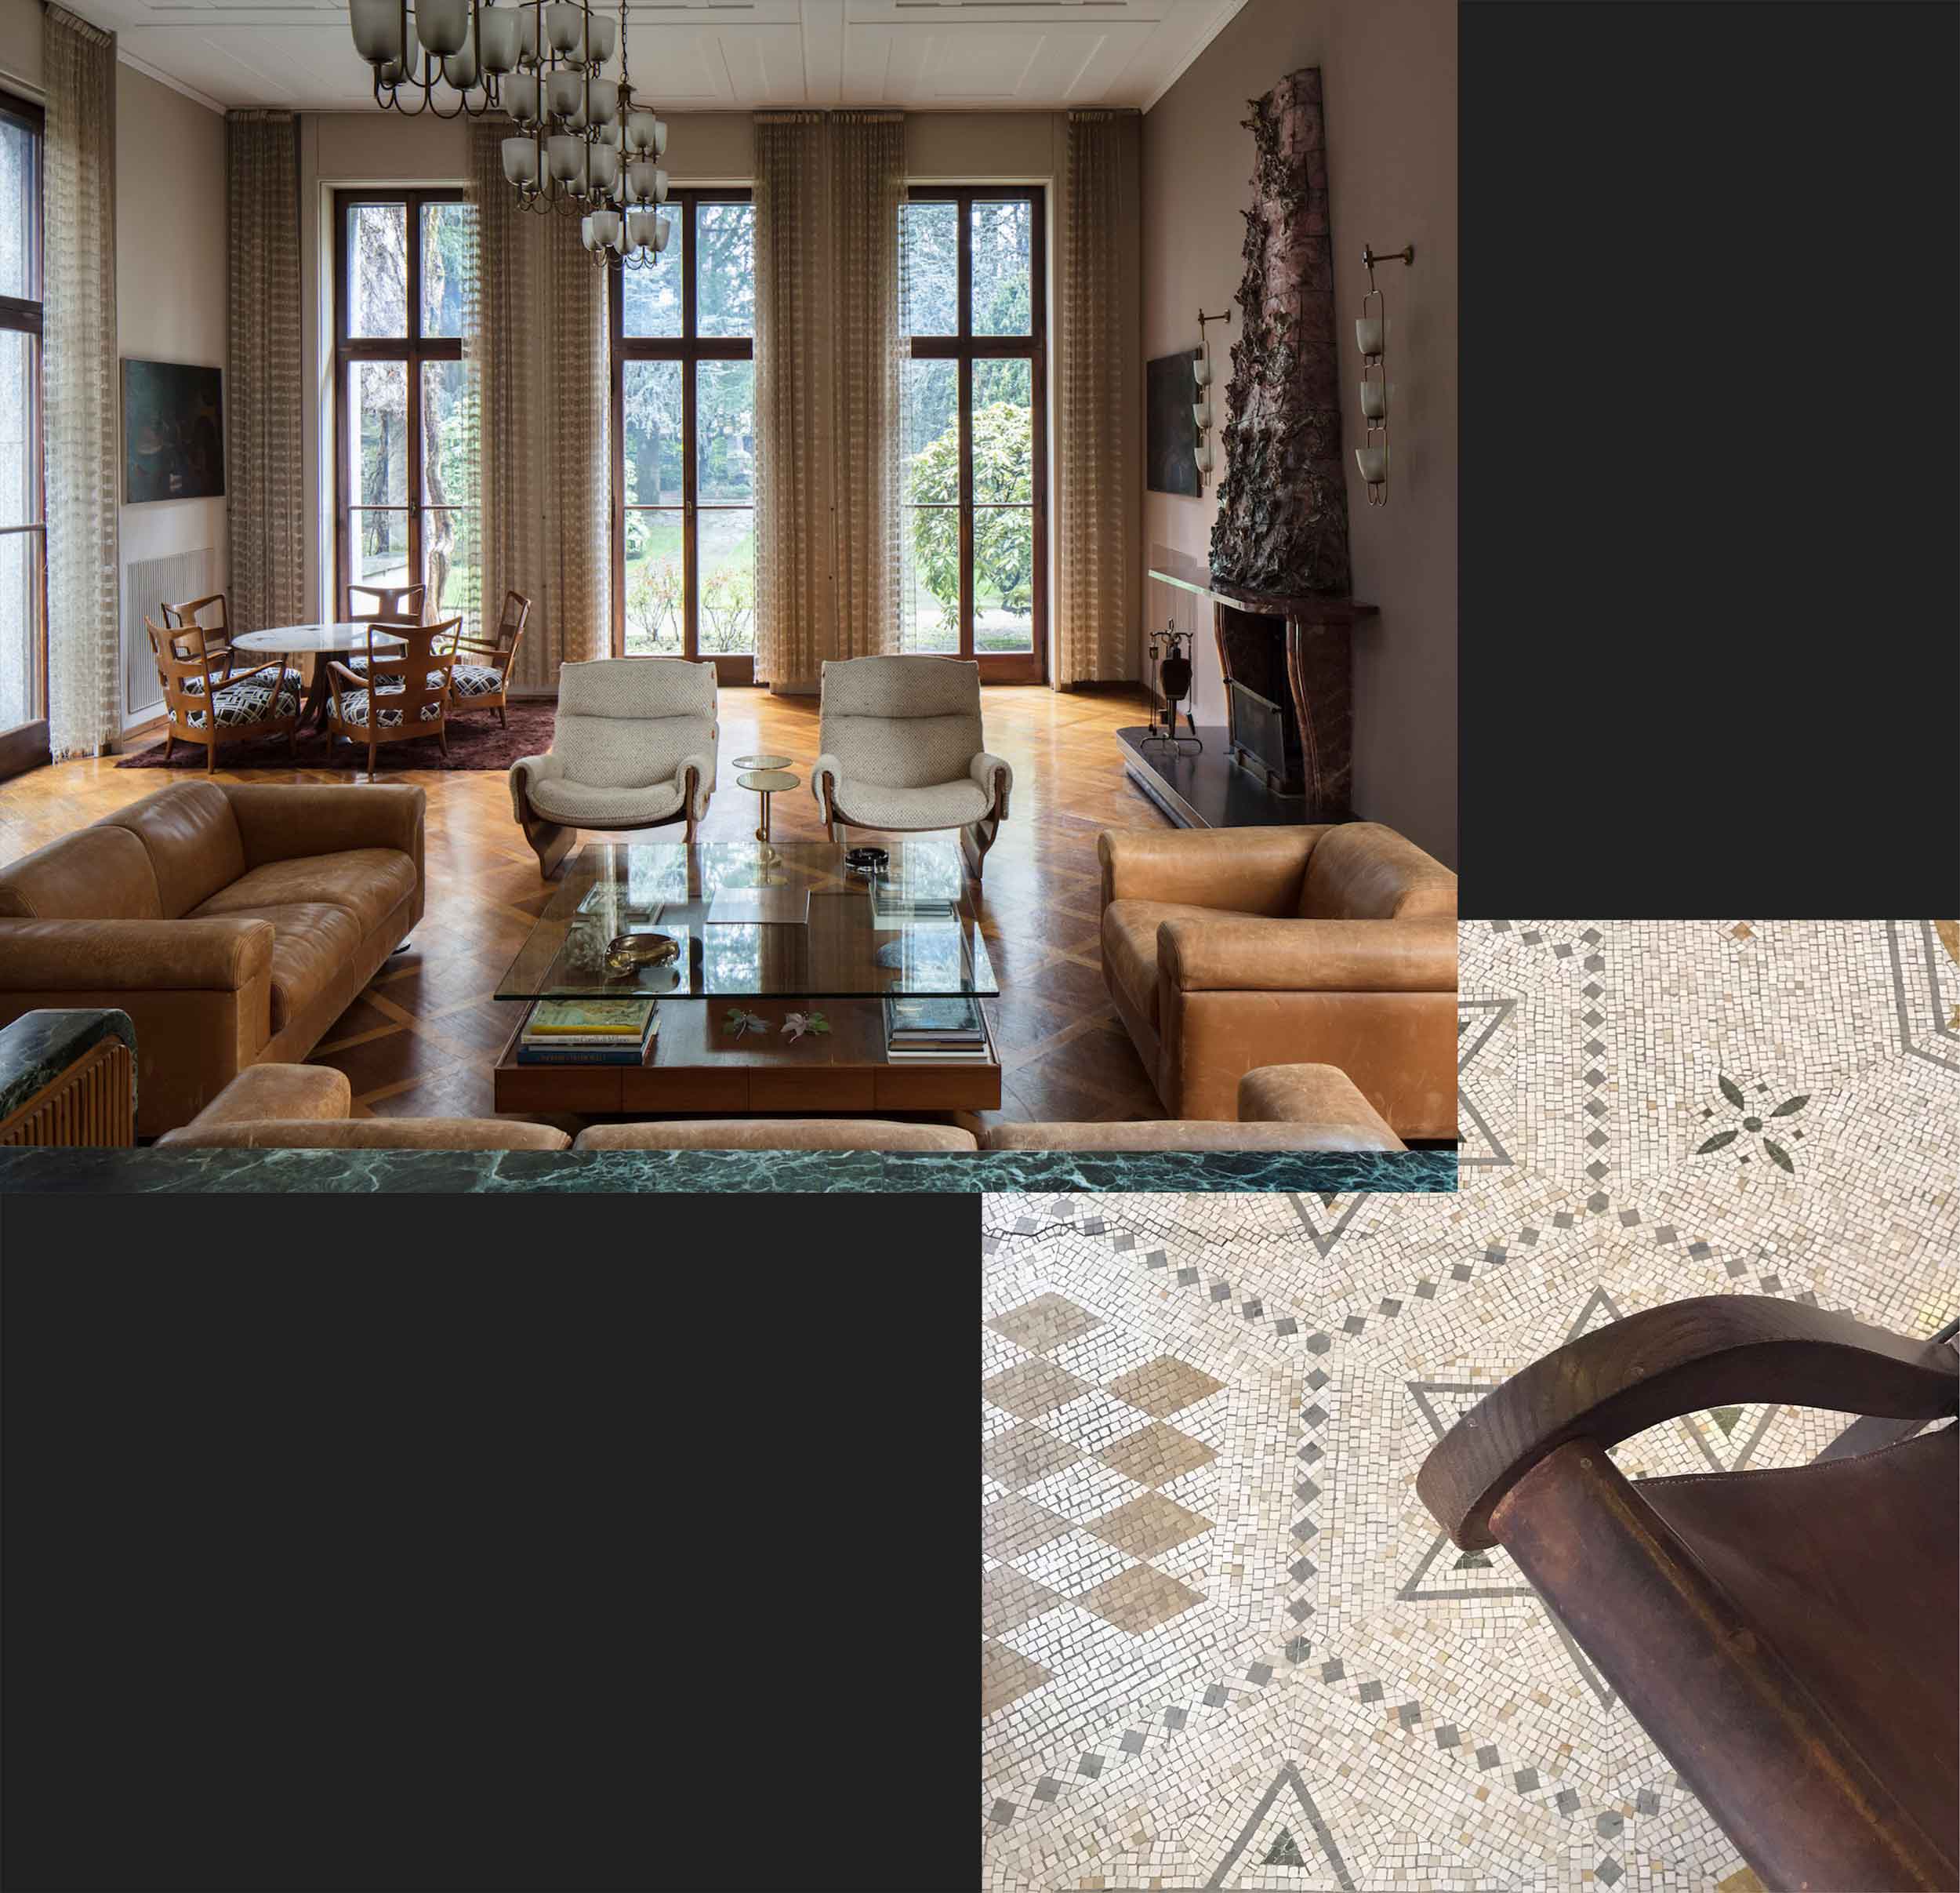 Collage of two photos: a living room and a detail of mosaic tiled pattern floor